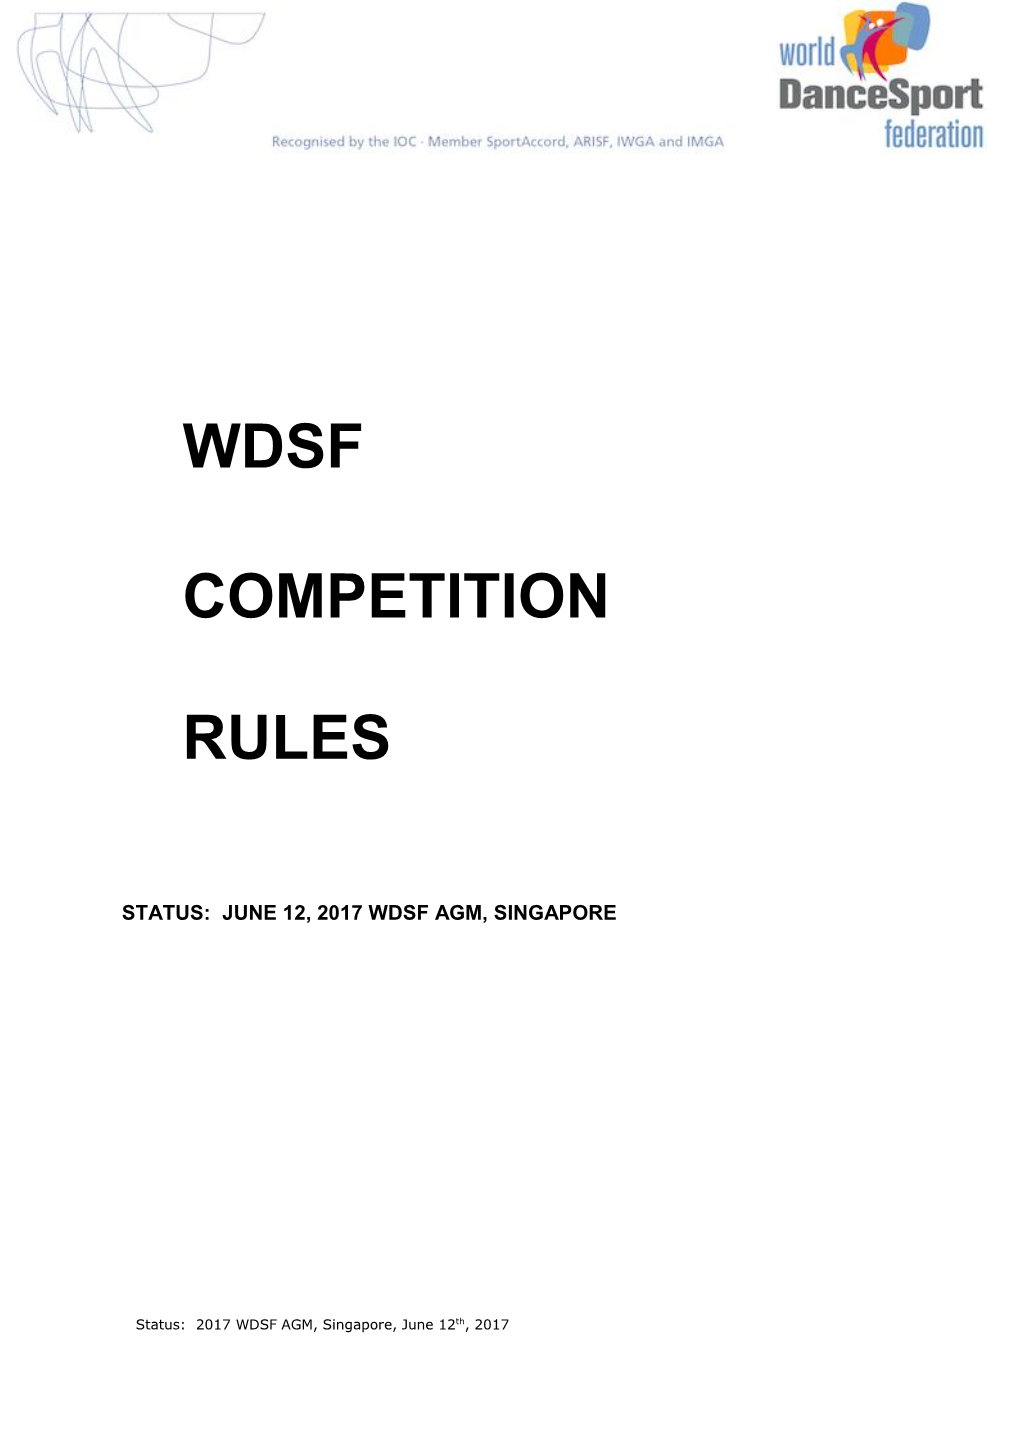 WDSF Competition Rules Apply to Dancesport Governed by the World Dancesport Federation and All of Its Members